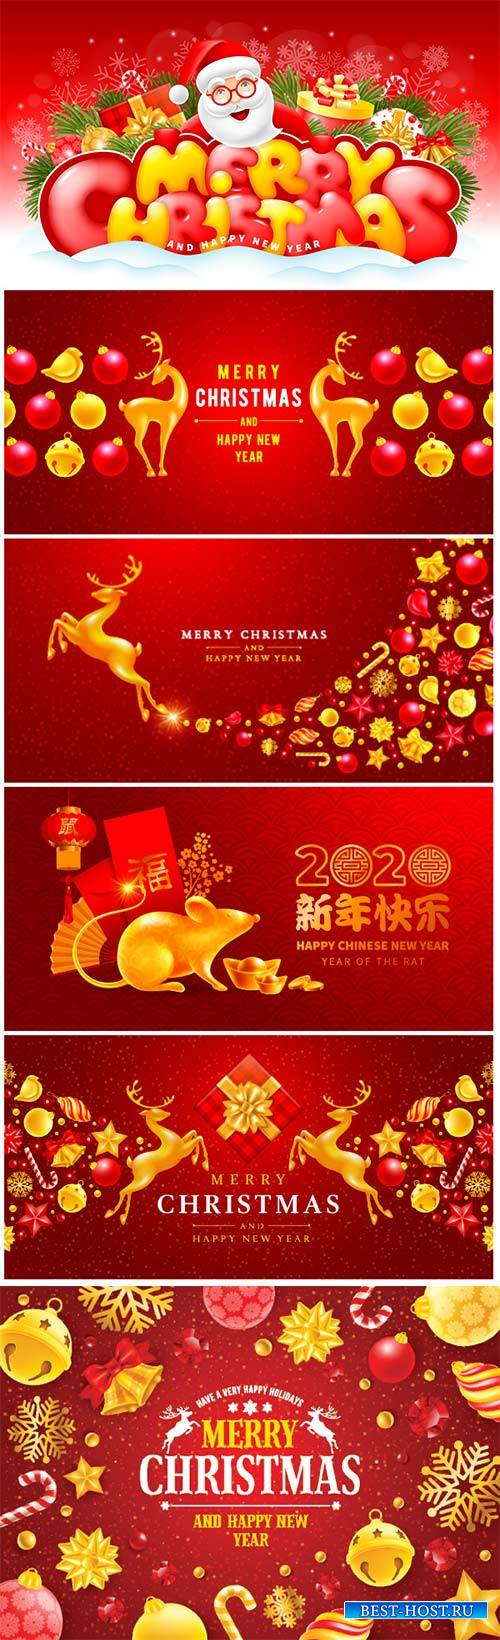 Cheerful and bright congratulation design for Christmas